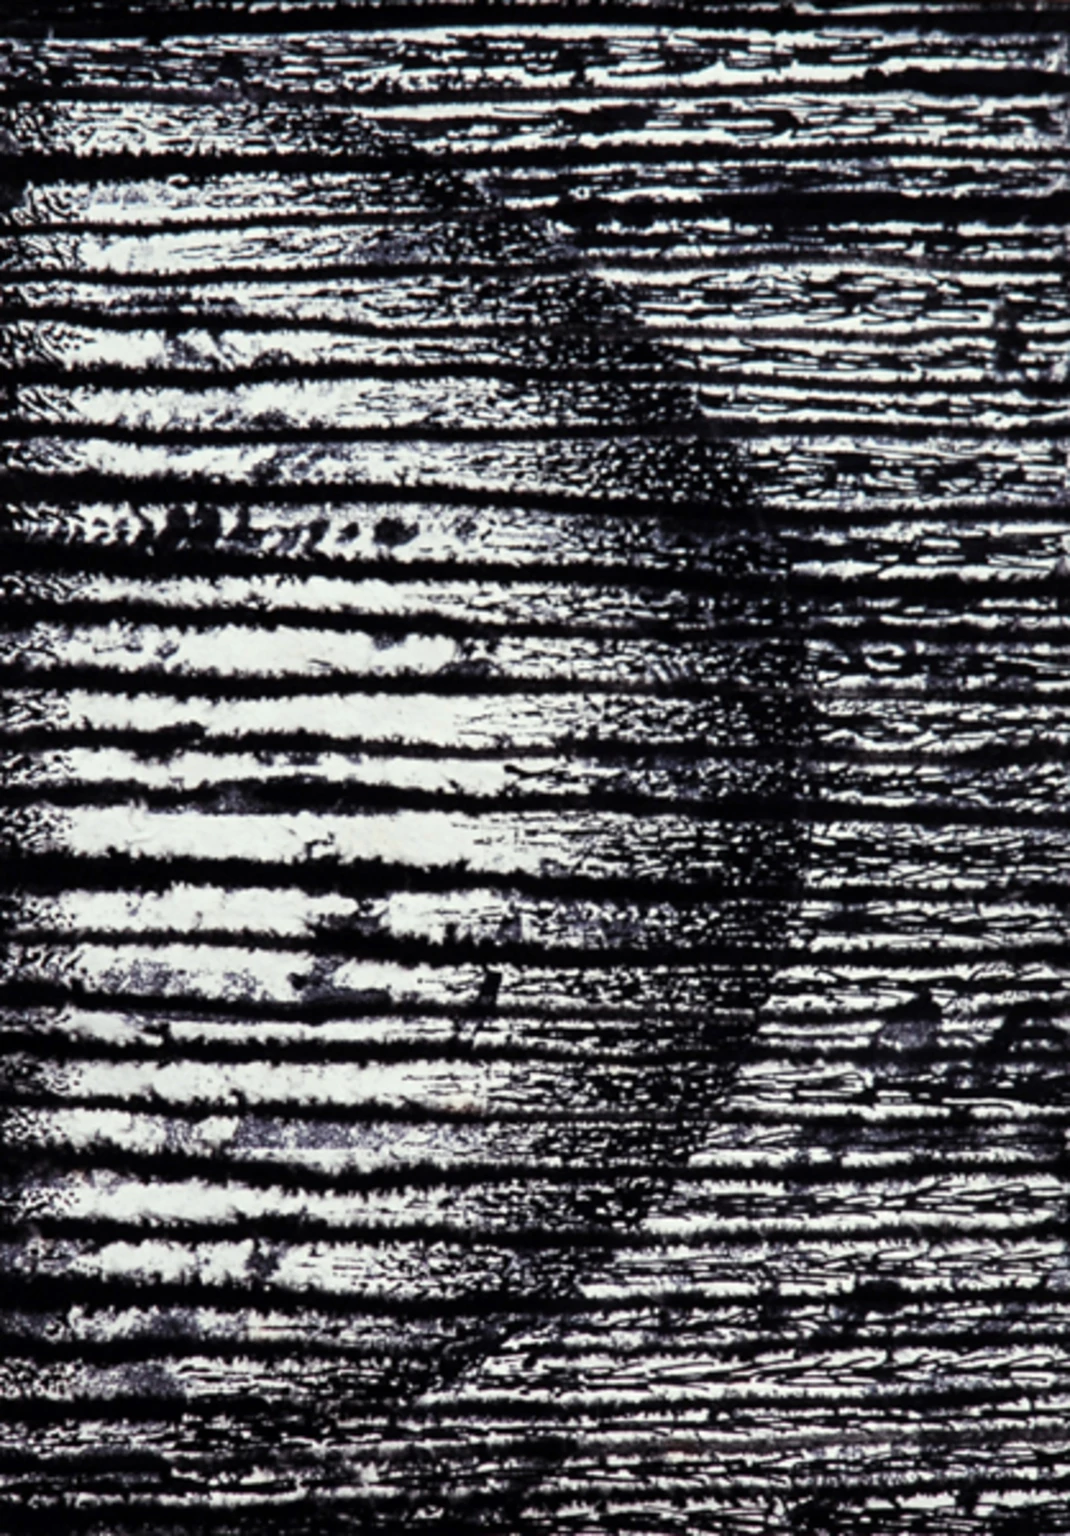 Saturated space, 1985 - paper, clack ink, 29 x 21 cm